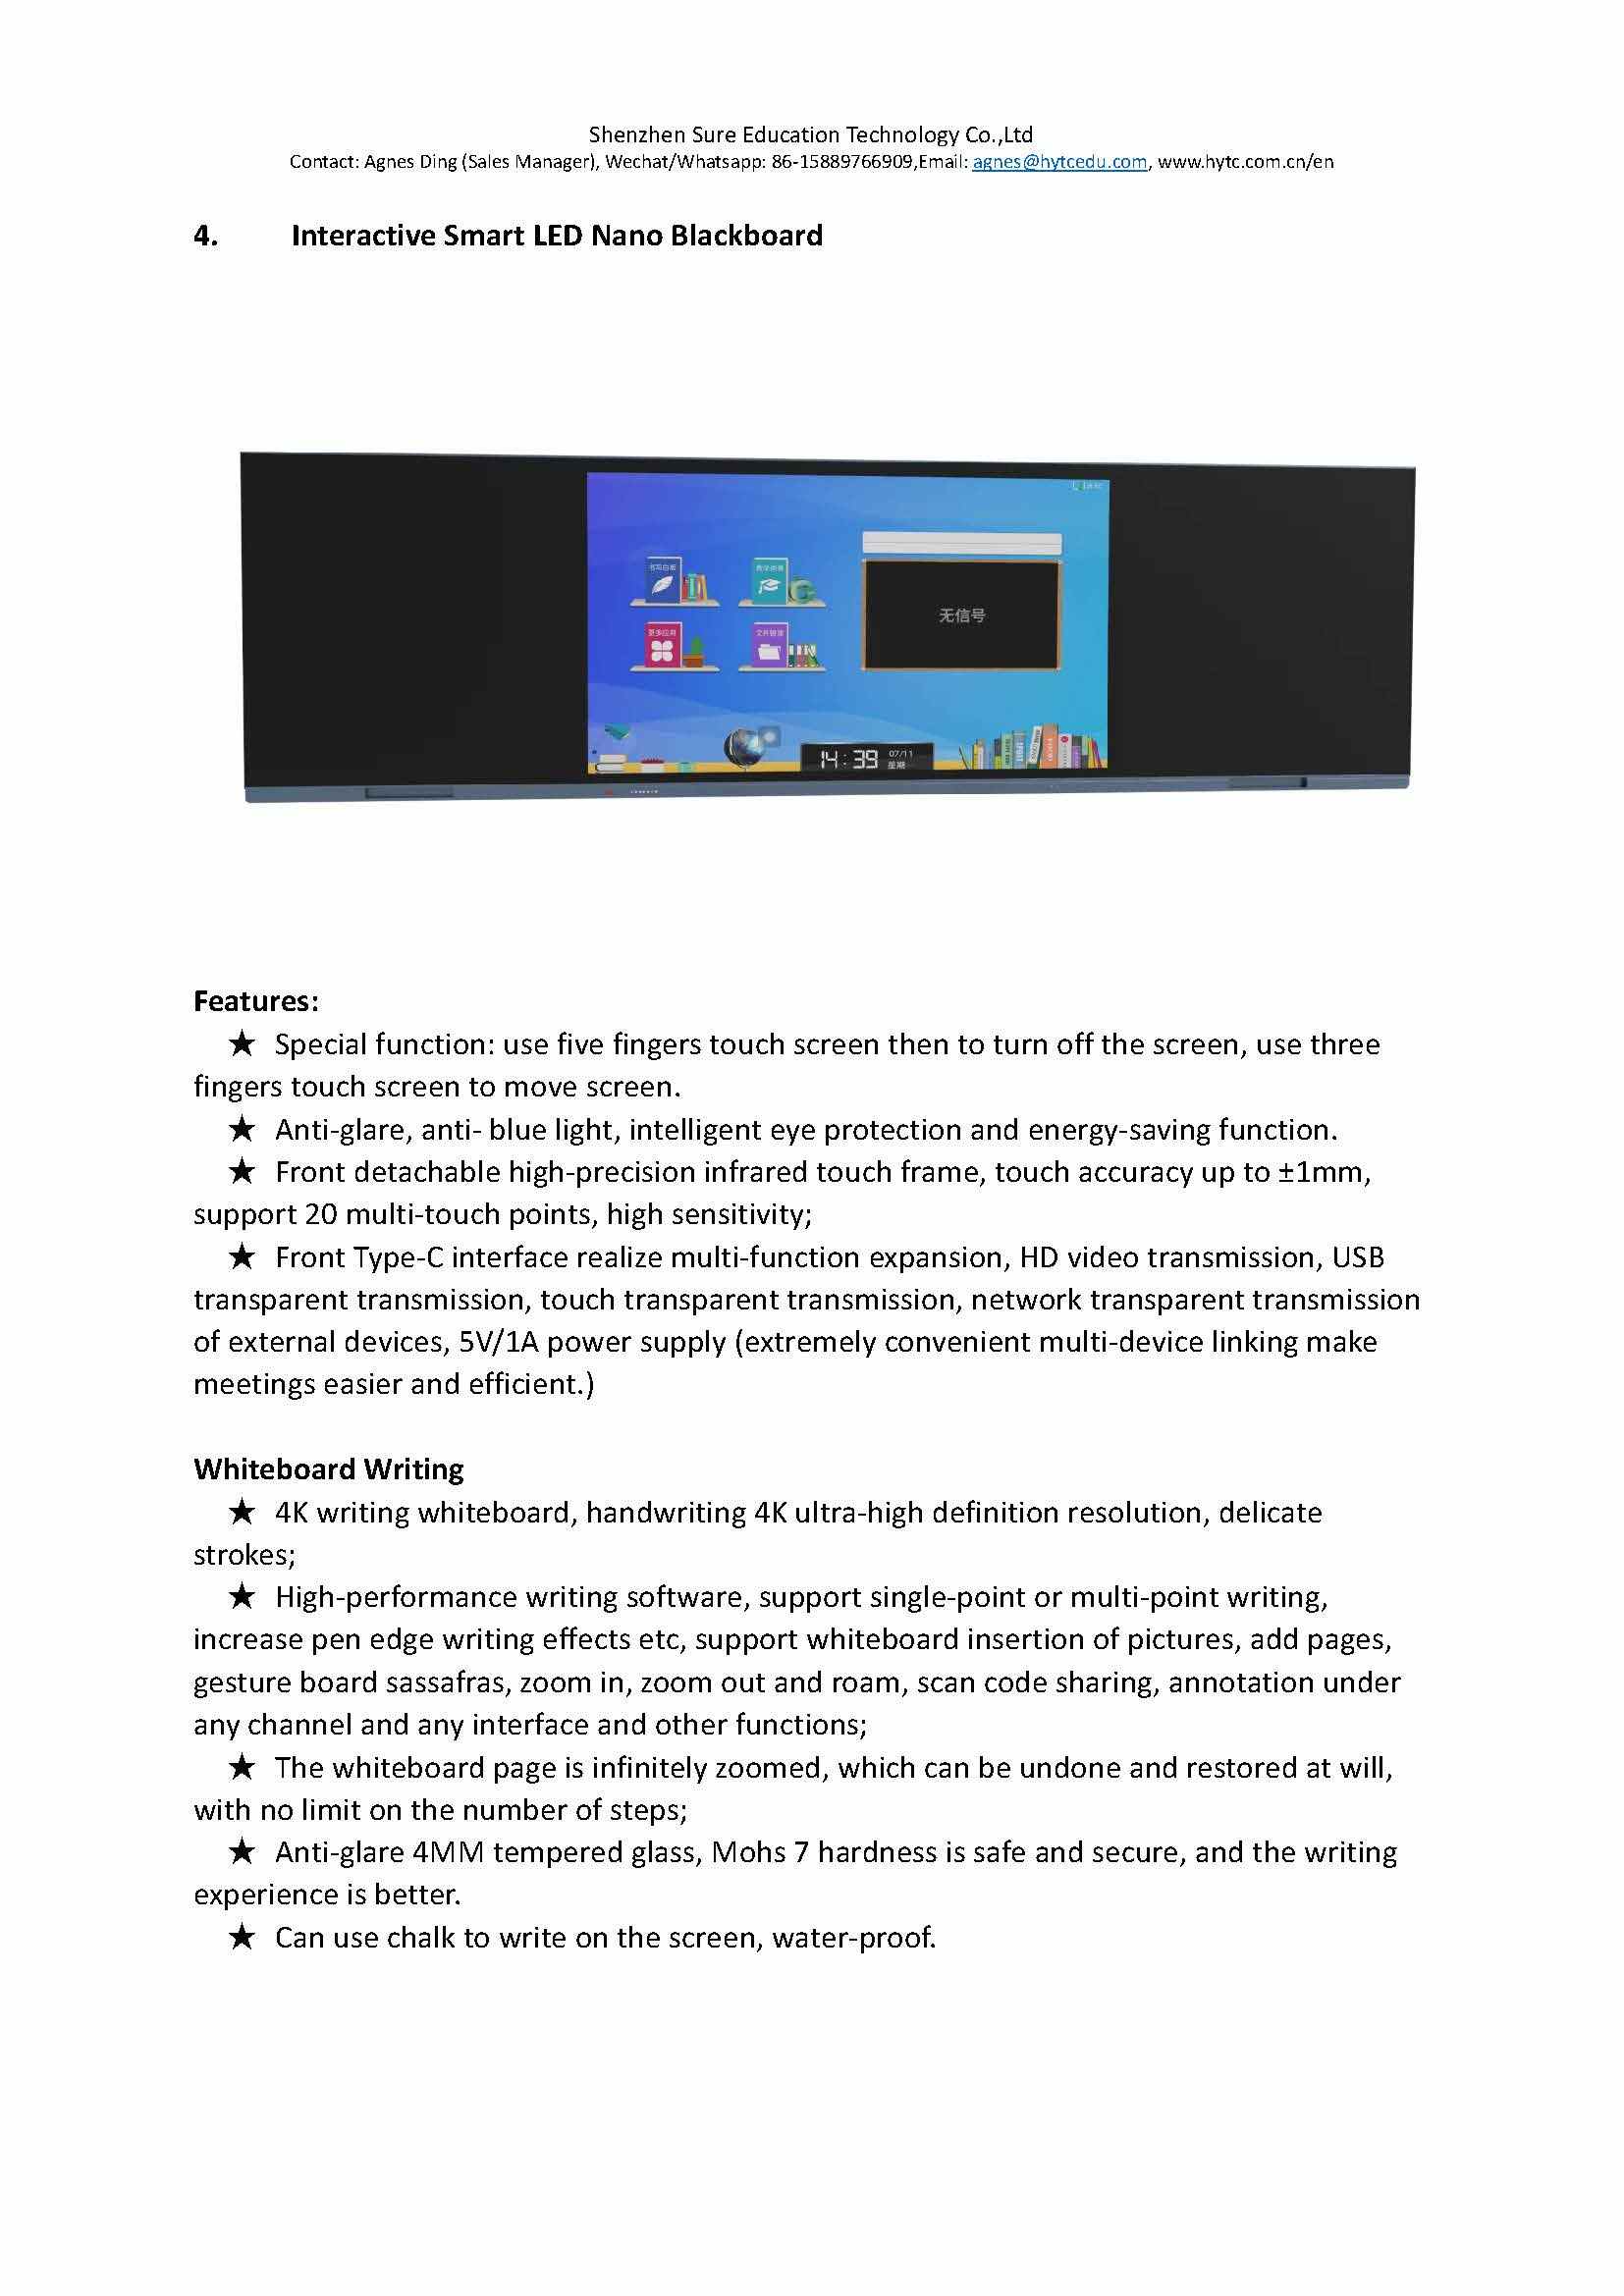 Interactive smart blackboard full screen writing device for classromm training institutions